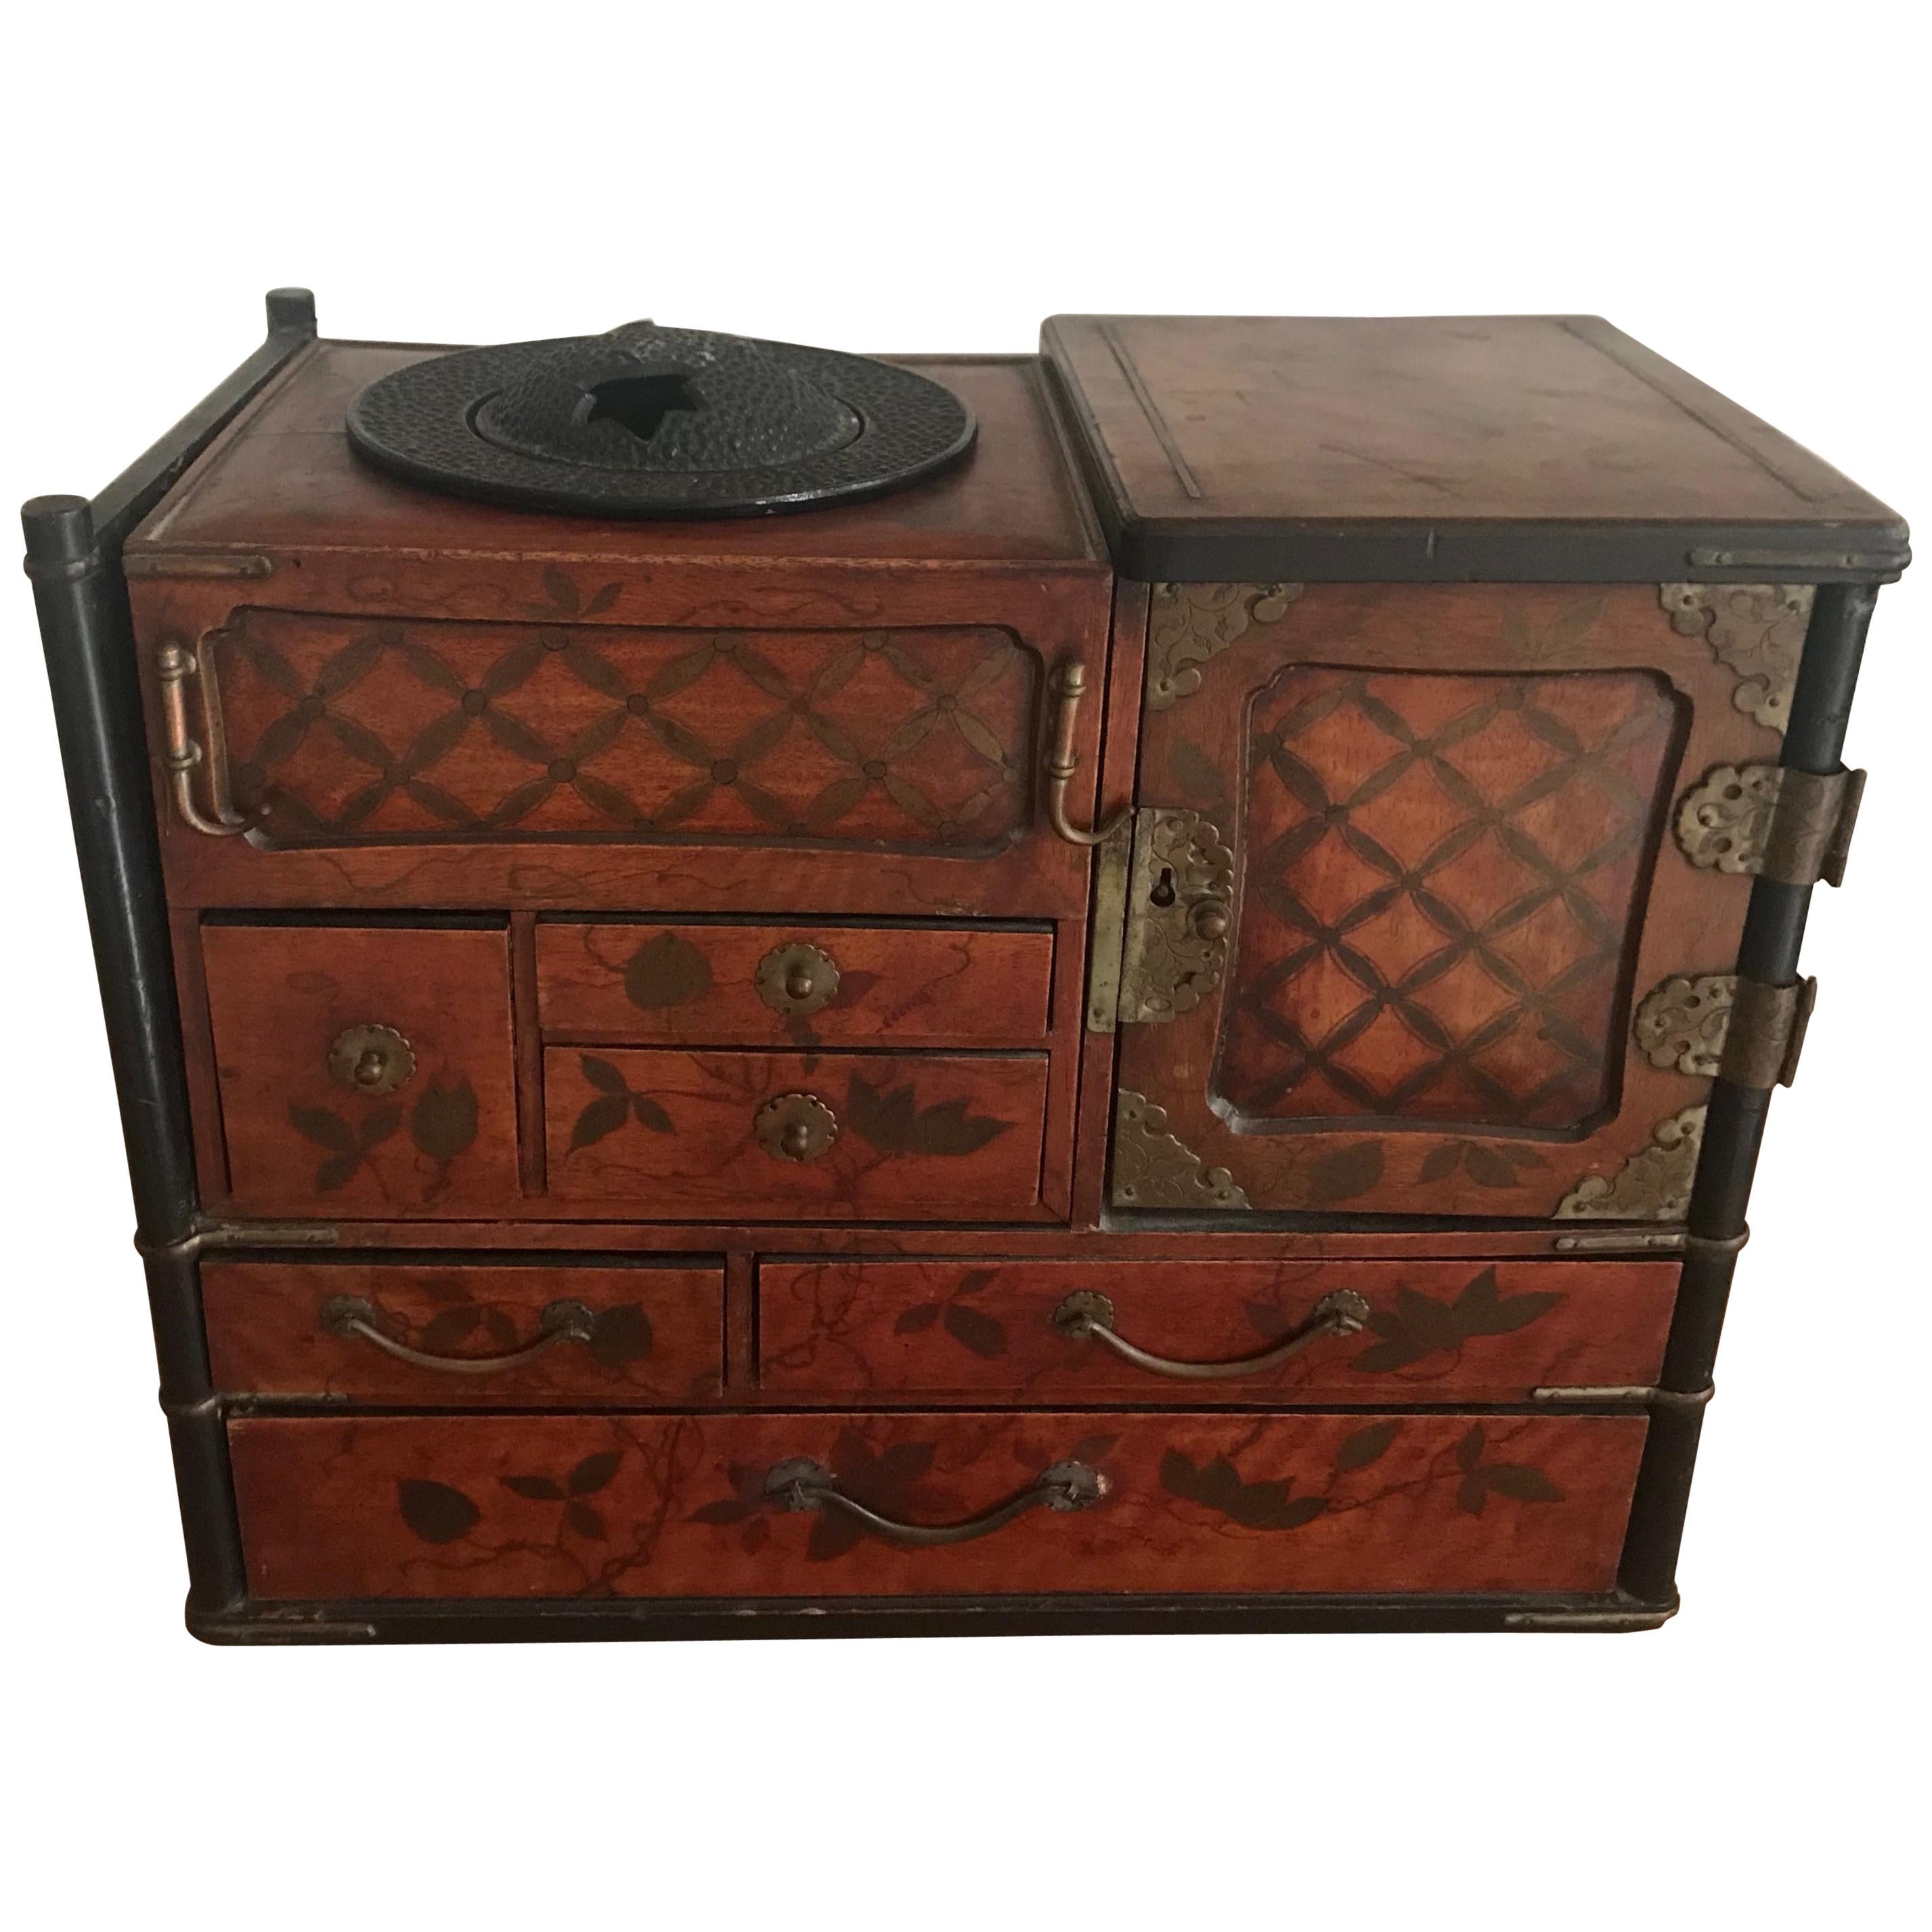 19th Century Japanese Lacquered Smoking Box /Tansu for Opium For Sale